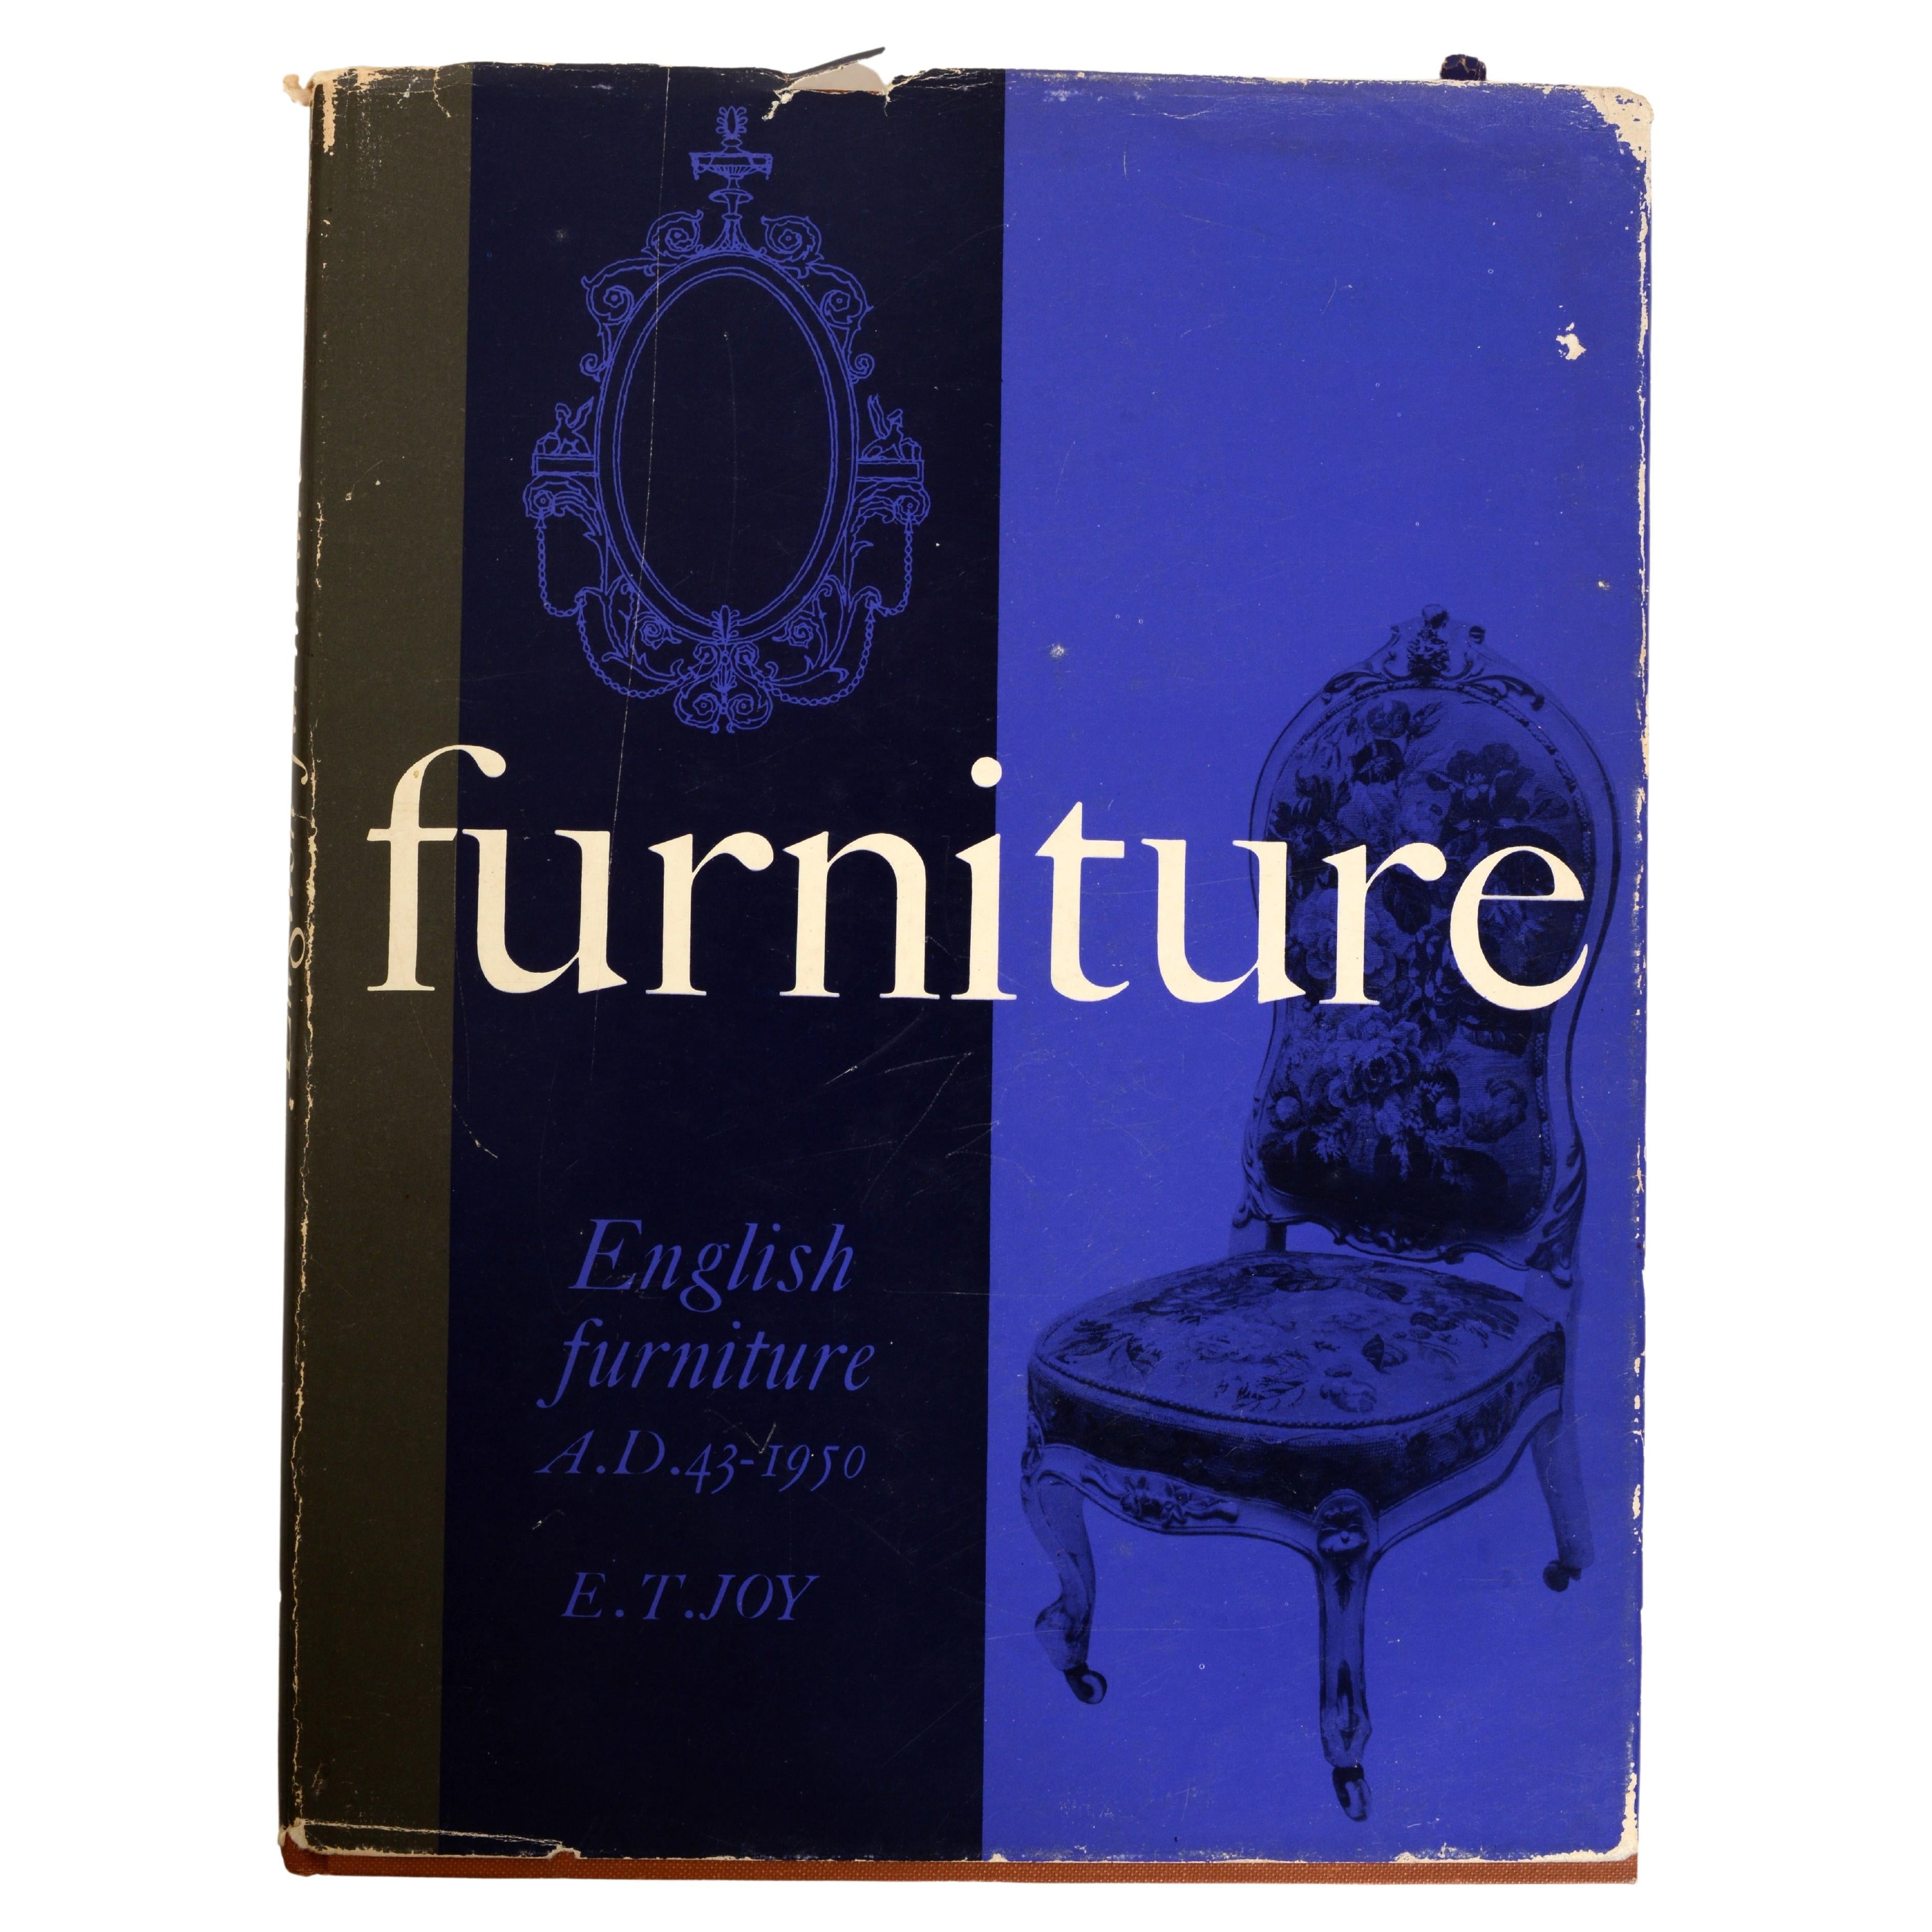 English Furniture a.D. 43, 1950 by Edward T. Joy, 1st Ed For Sale